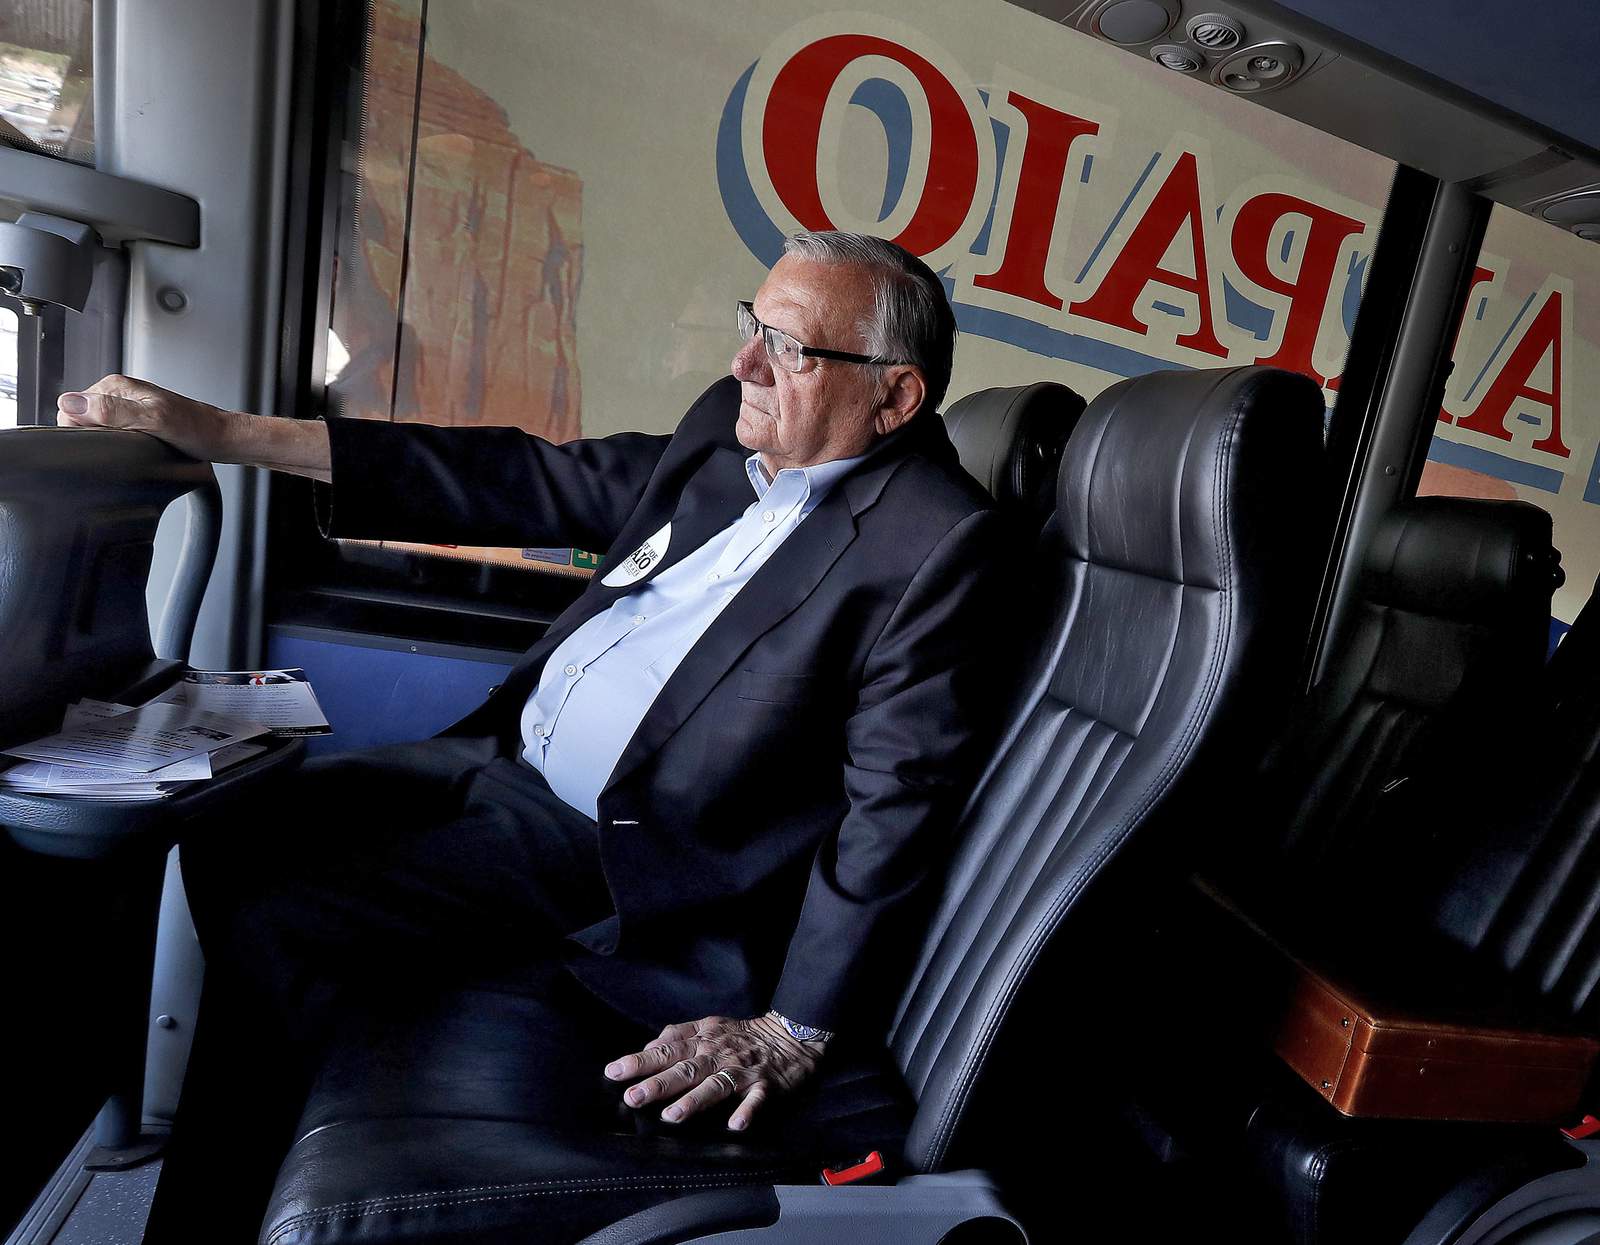 Joe Arpaio defeated in whats likely his last political race